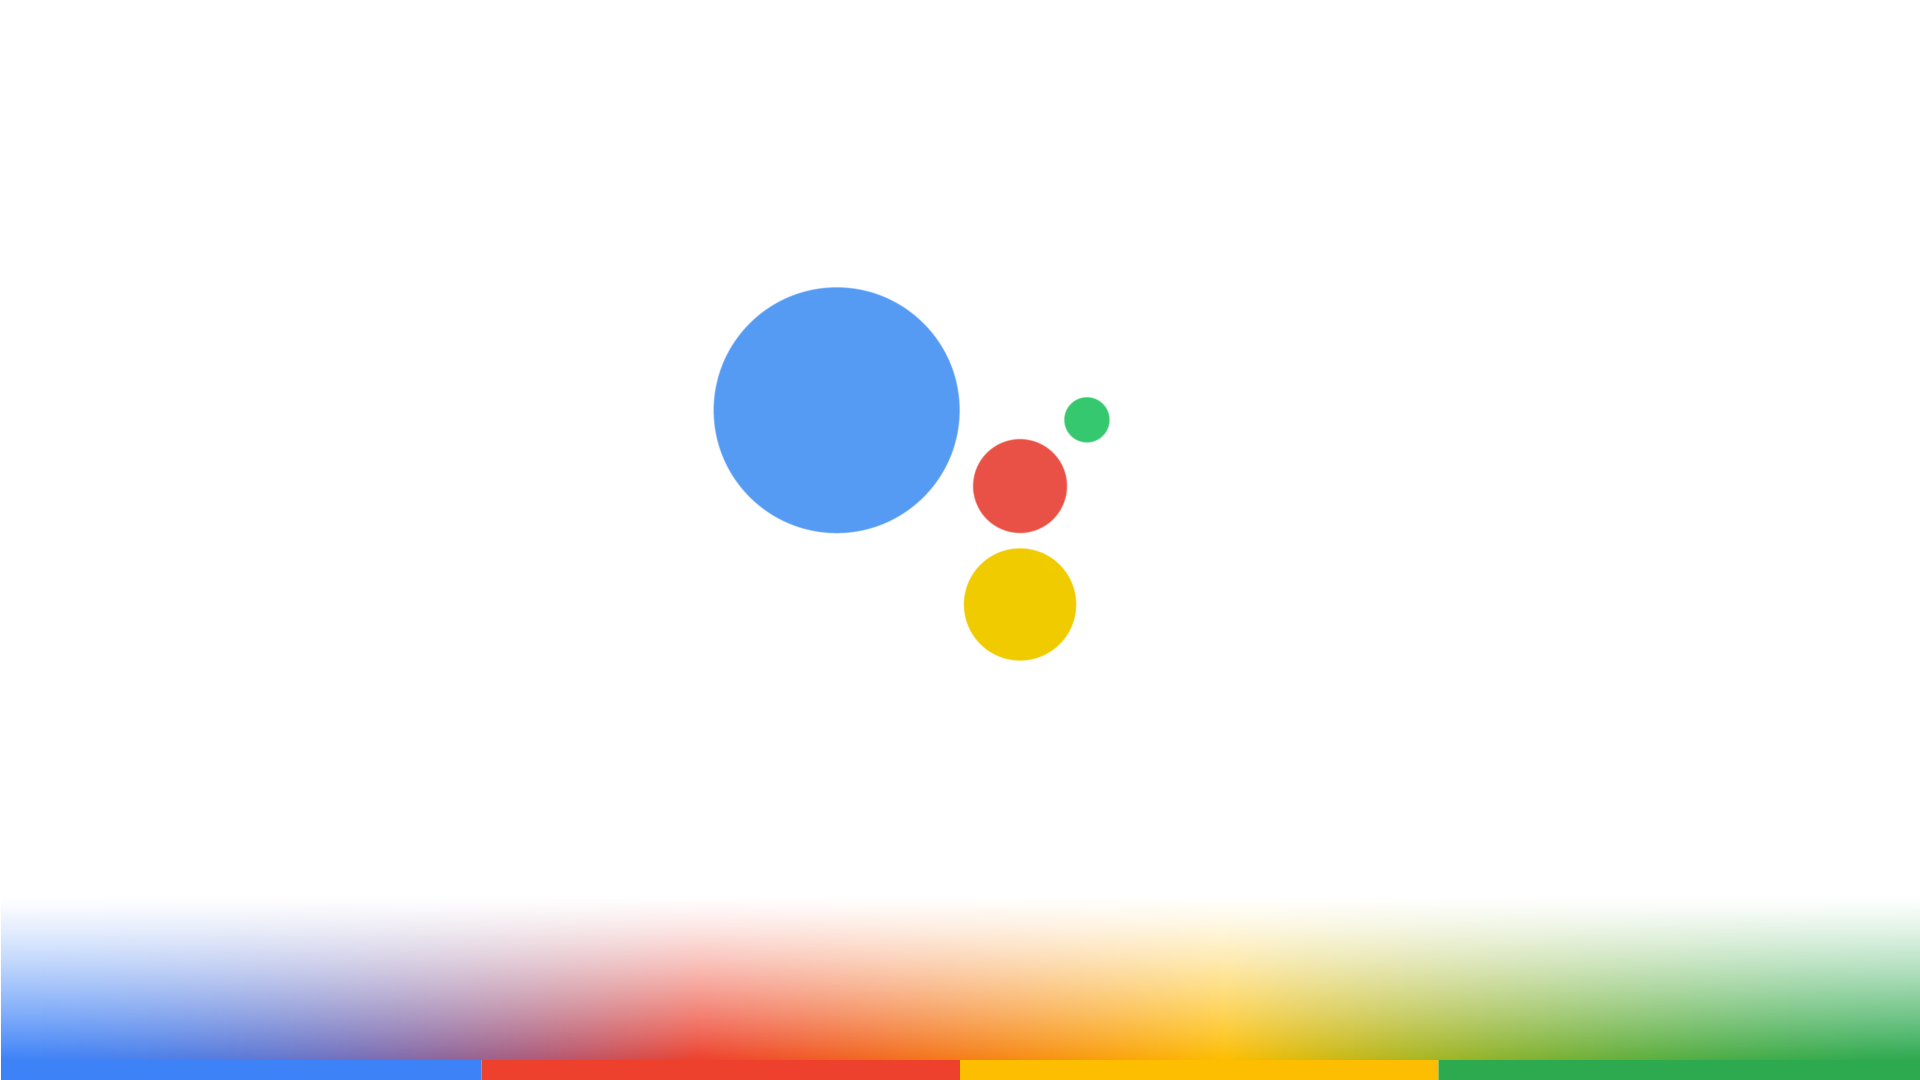 Google Assistant can now notify you when you need to change your password and even assist you in doing so